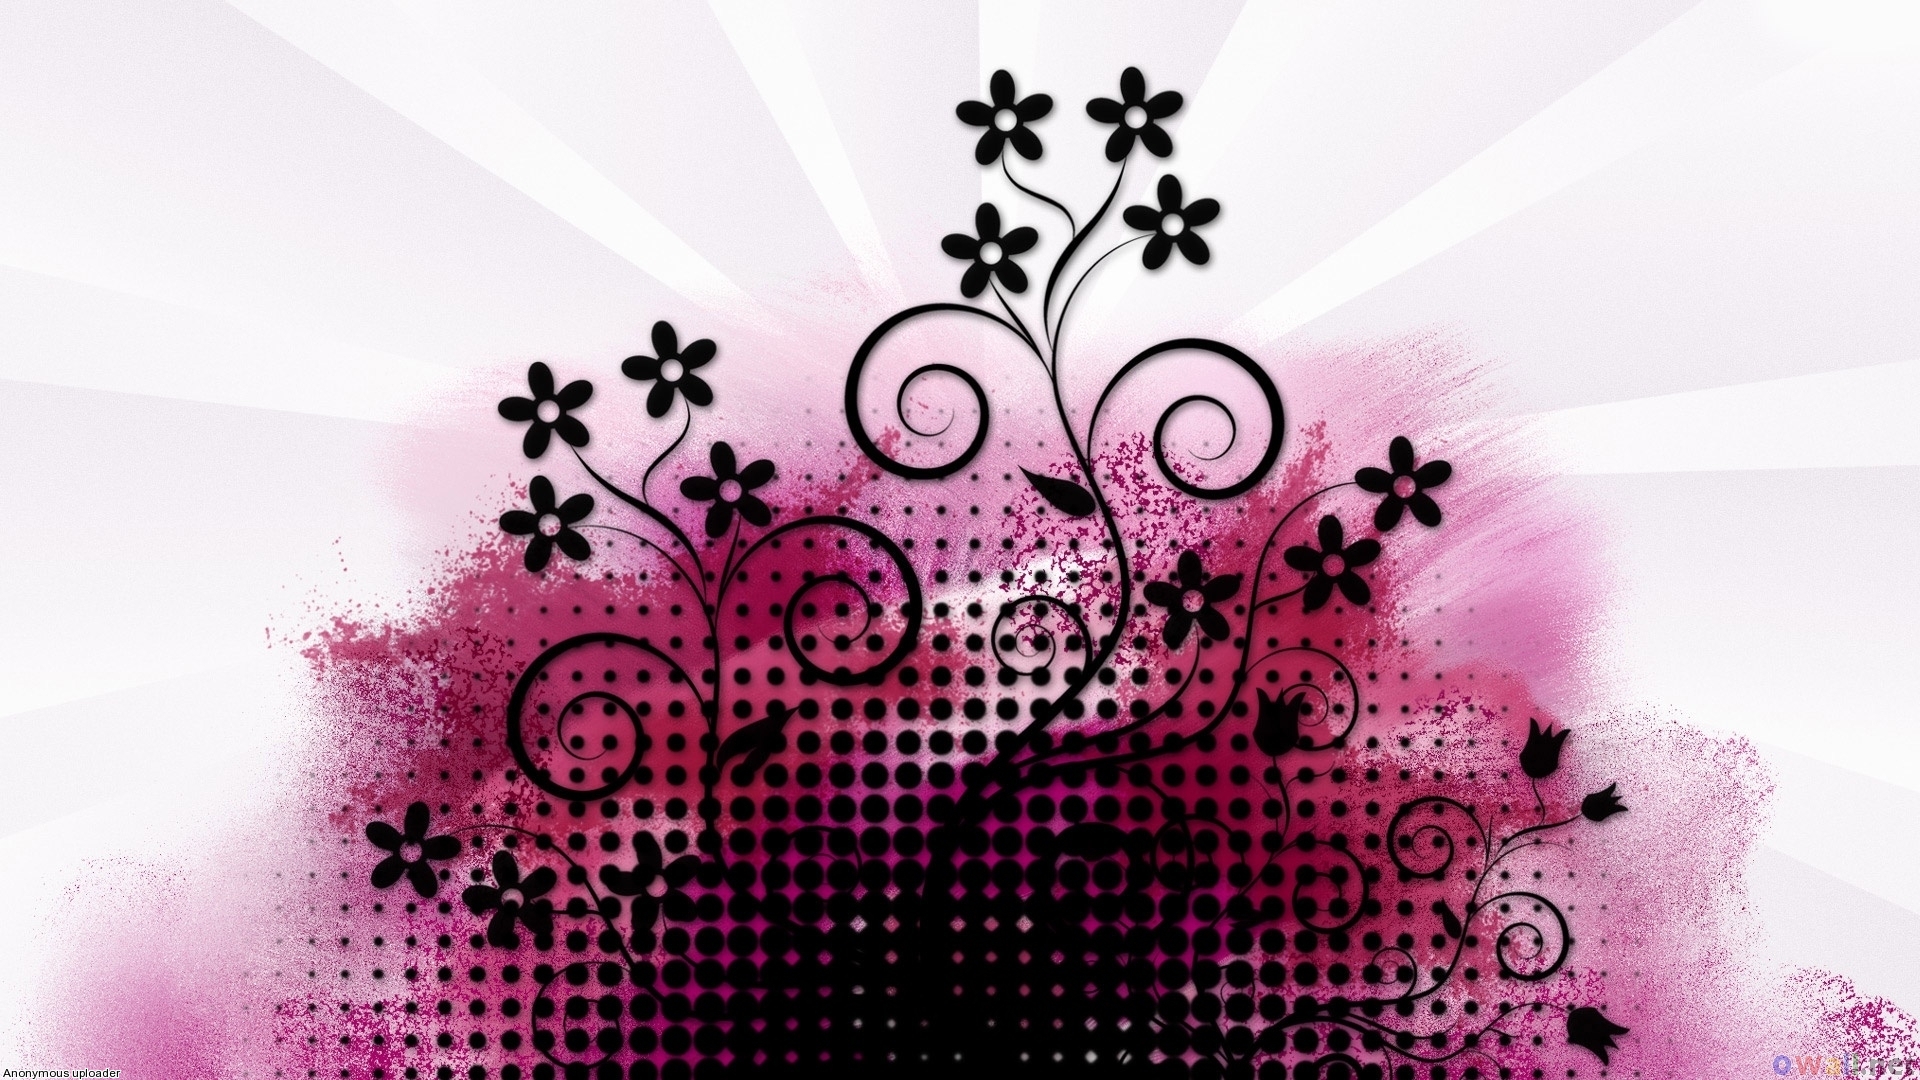 girly wallpapers hd,pink,graphic design,pattern,design,illustration